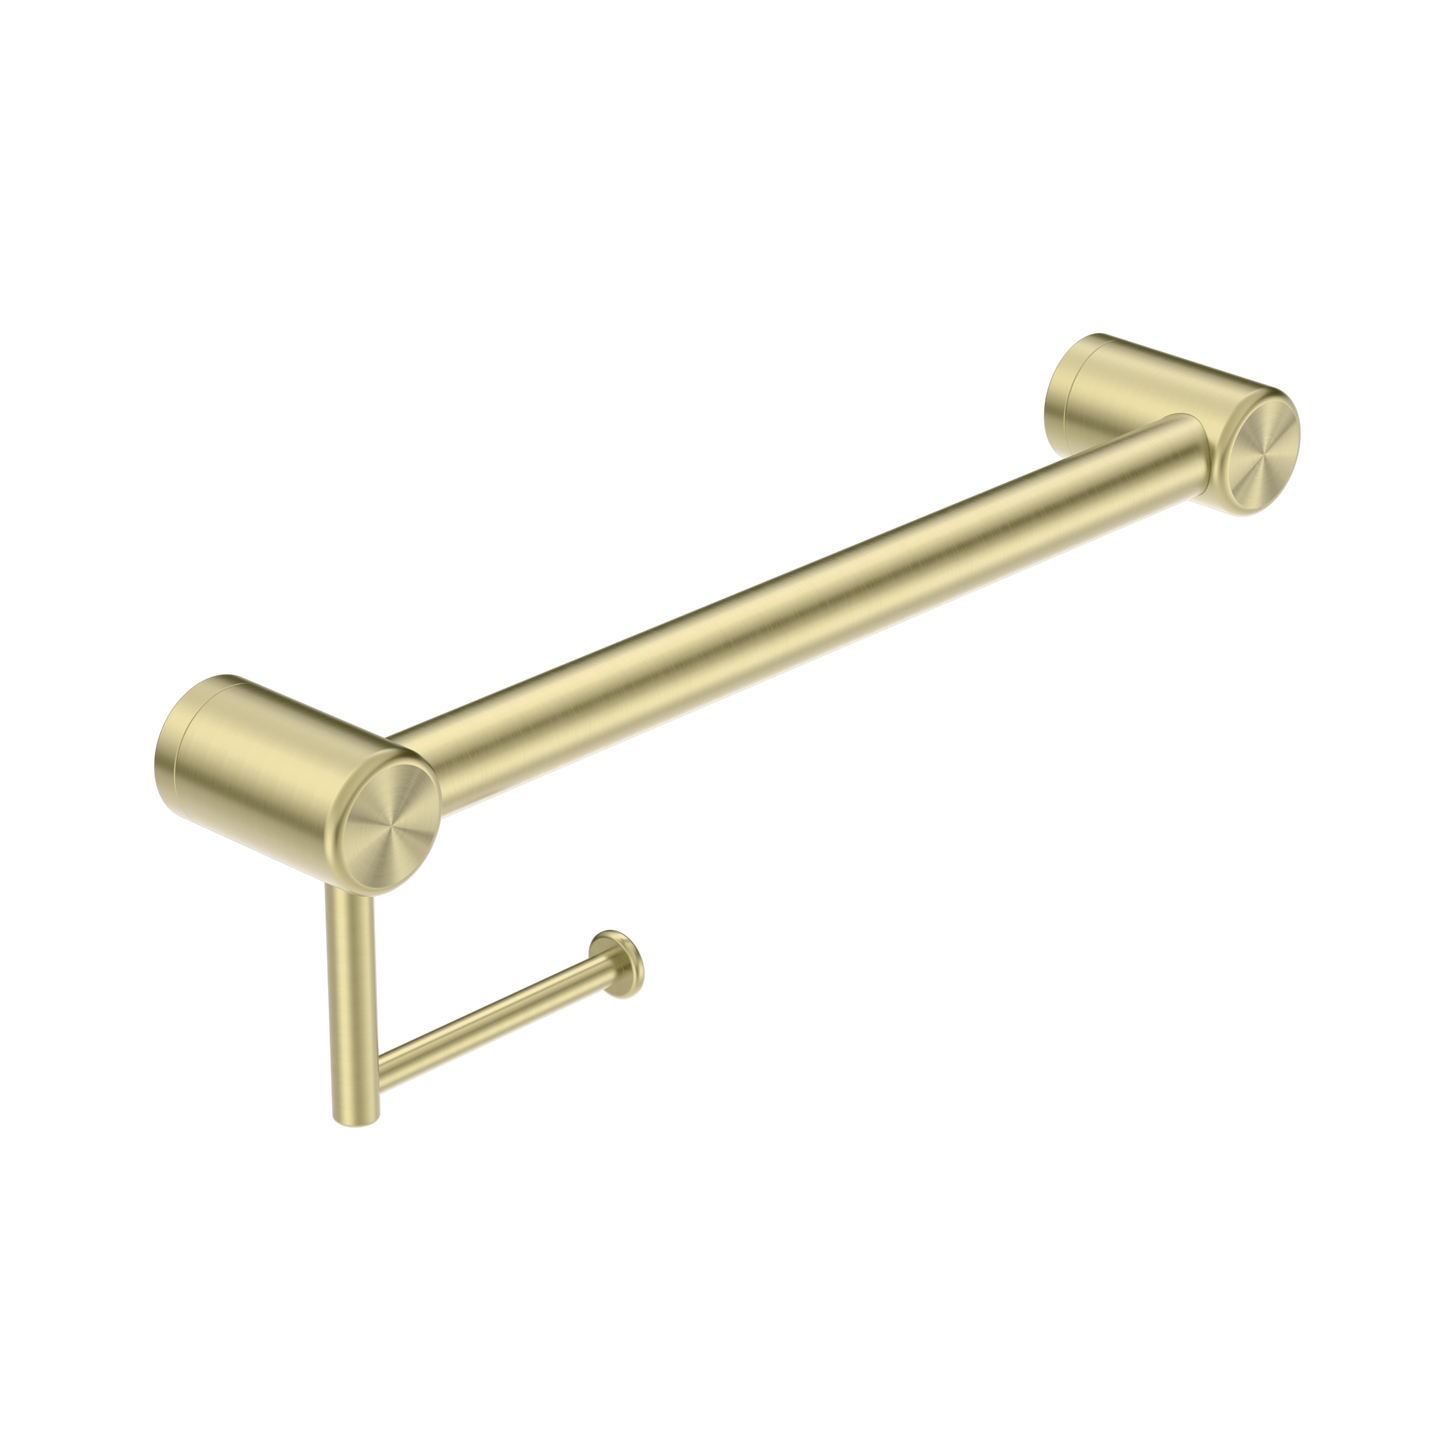 CALIBRE MECCA 32MM GRAB RAIL WITH TOILET ROLL HOLDER 450MM BRUSHED GOLD